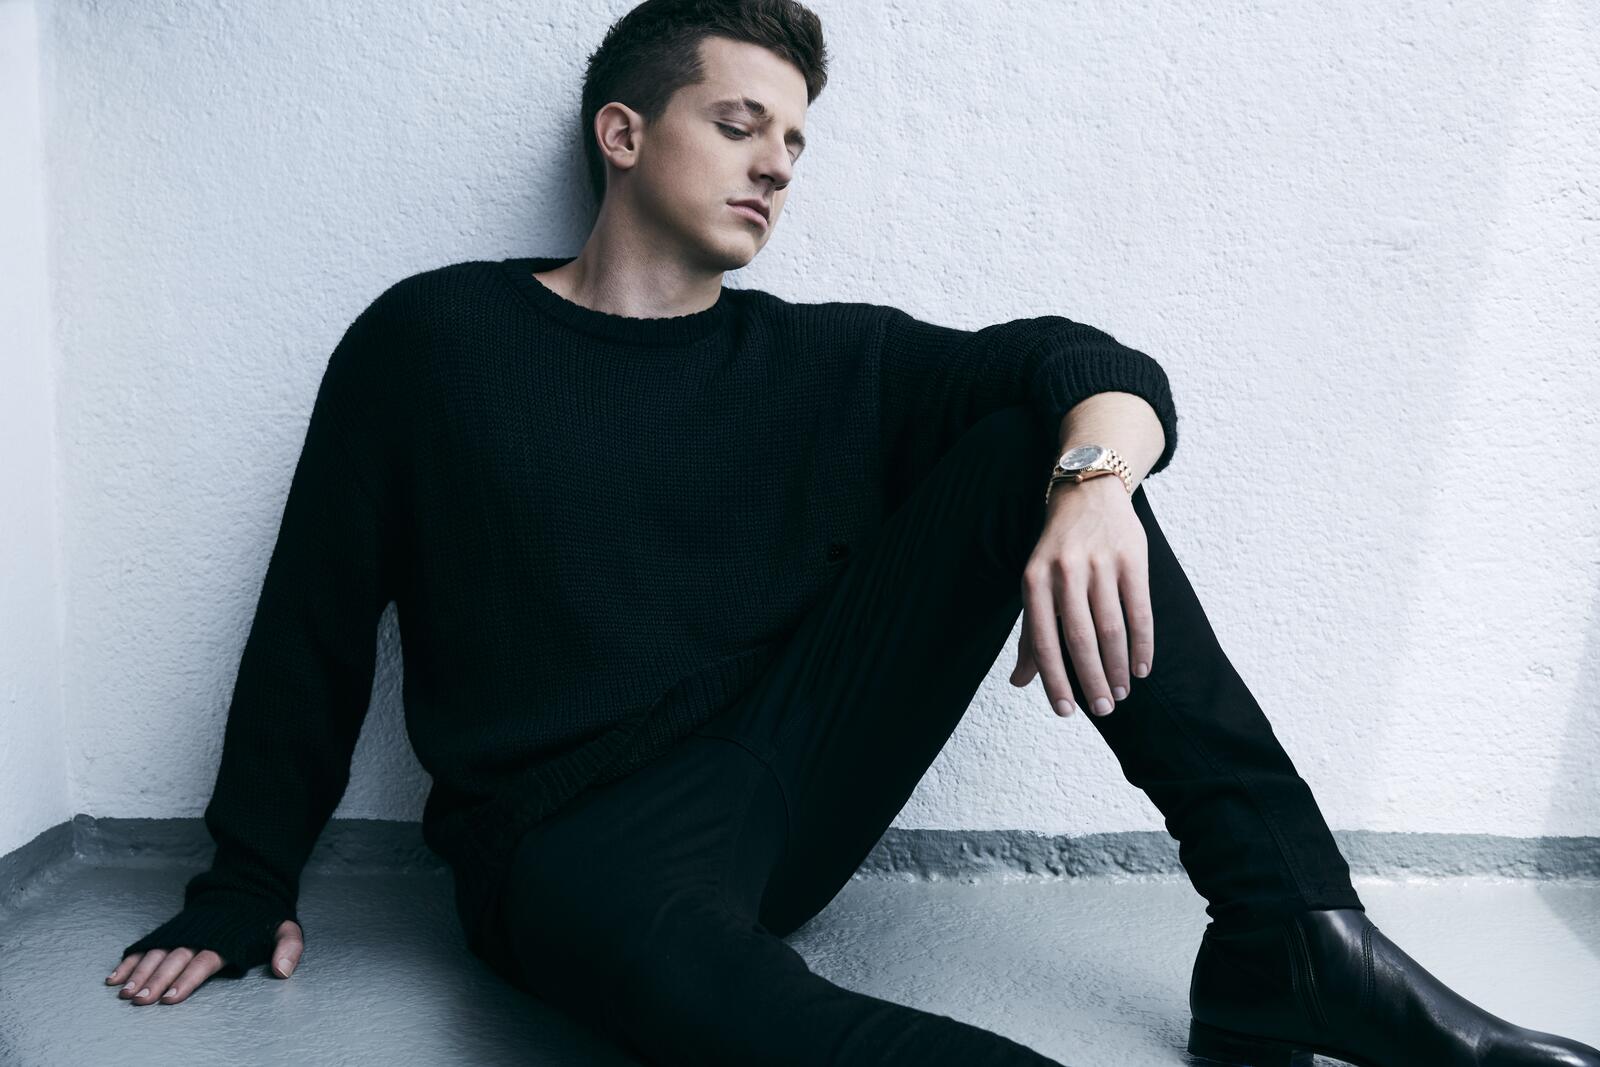 Wallpapers male celebrities Charlie Puth music on the desktop